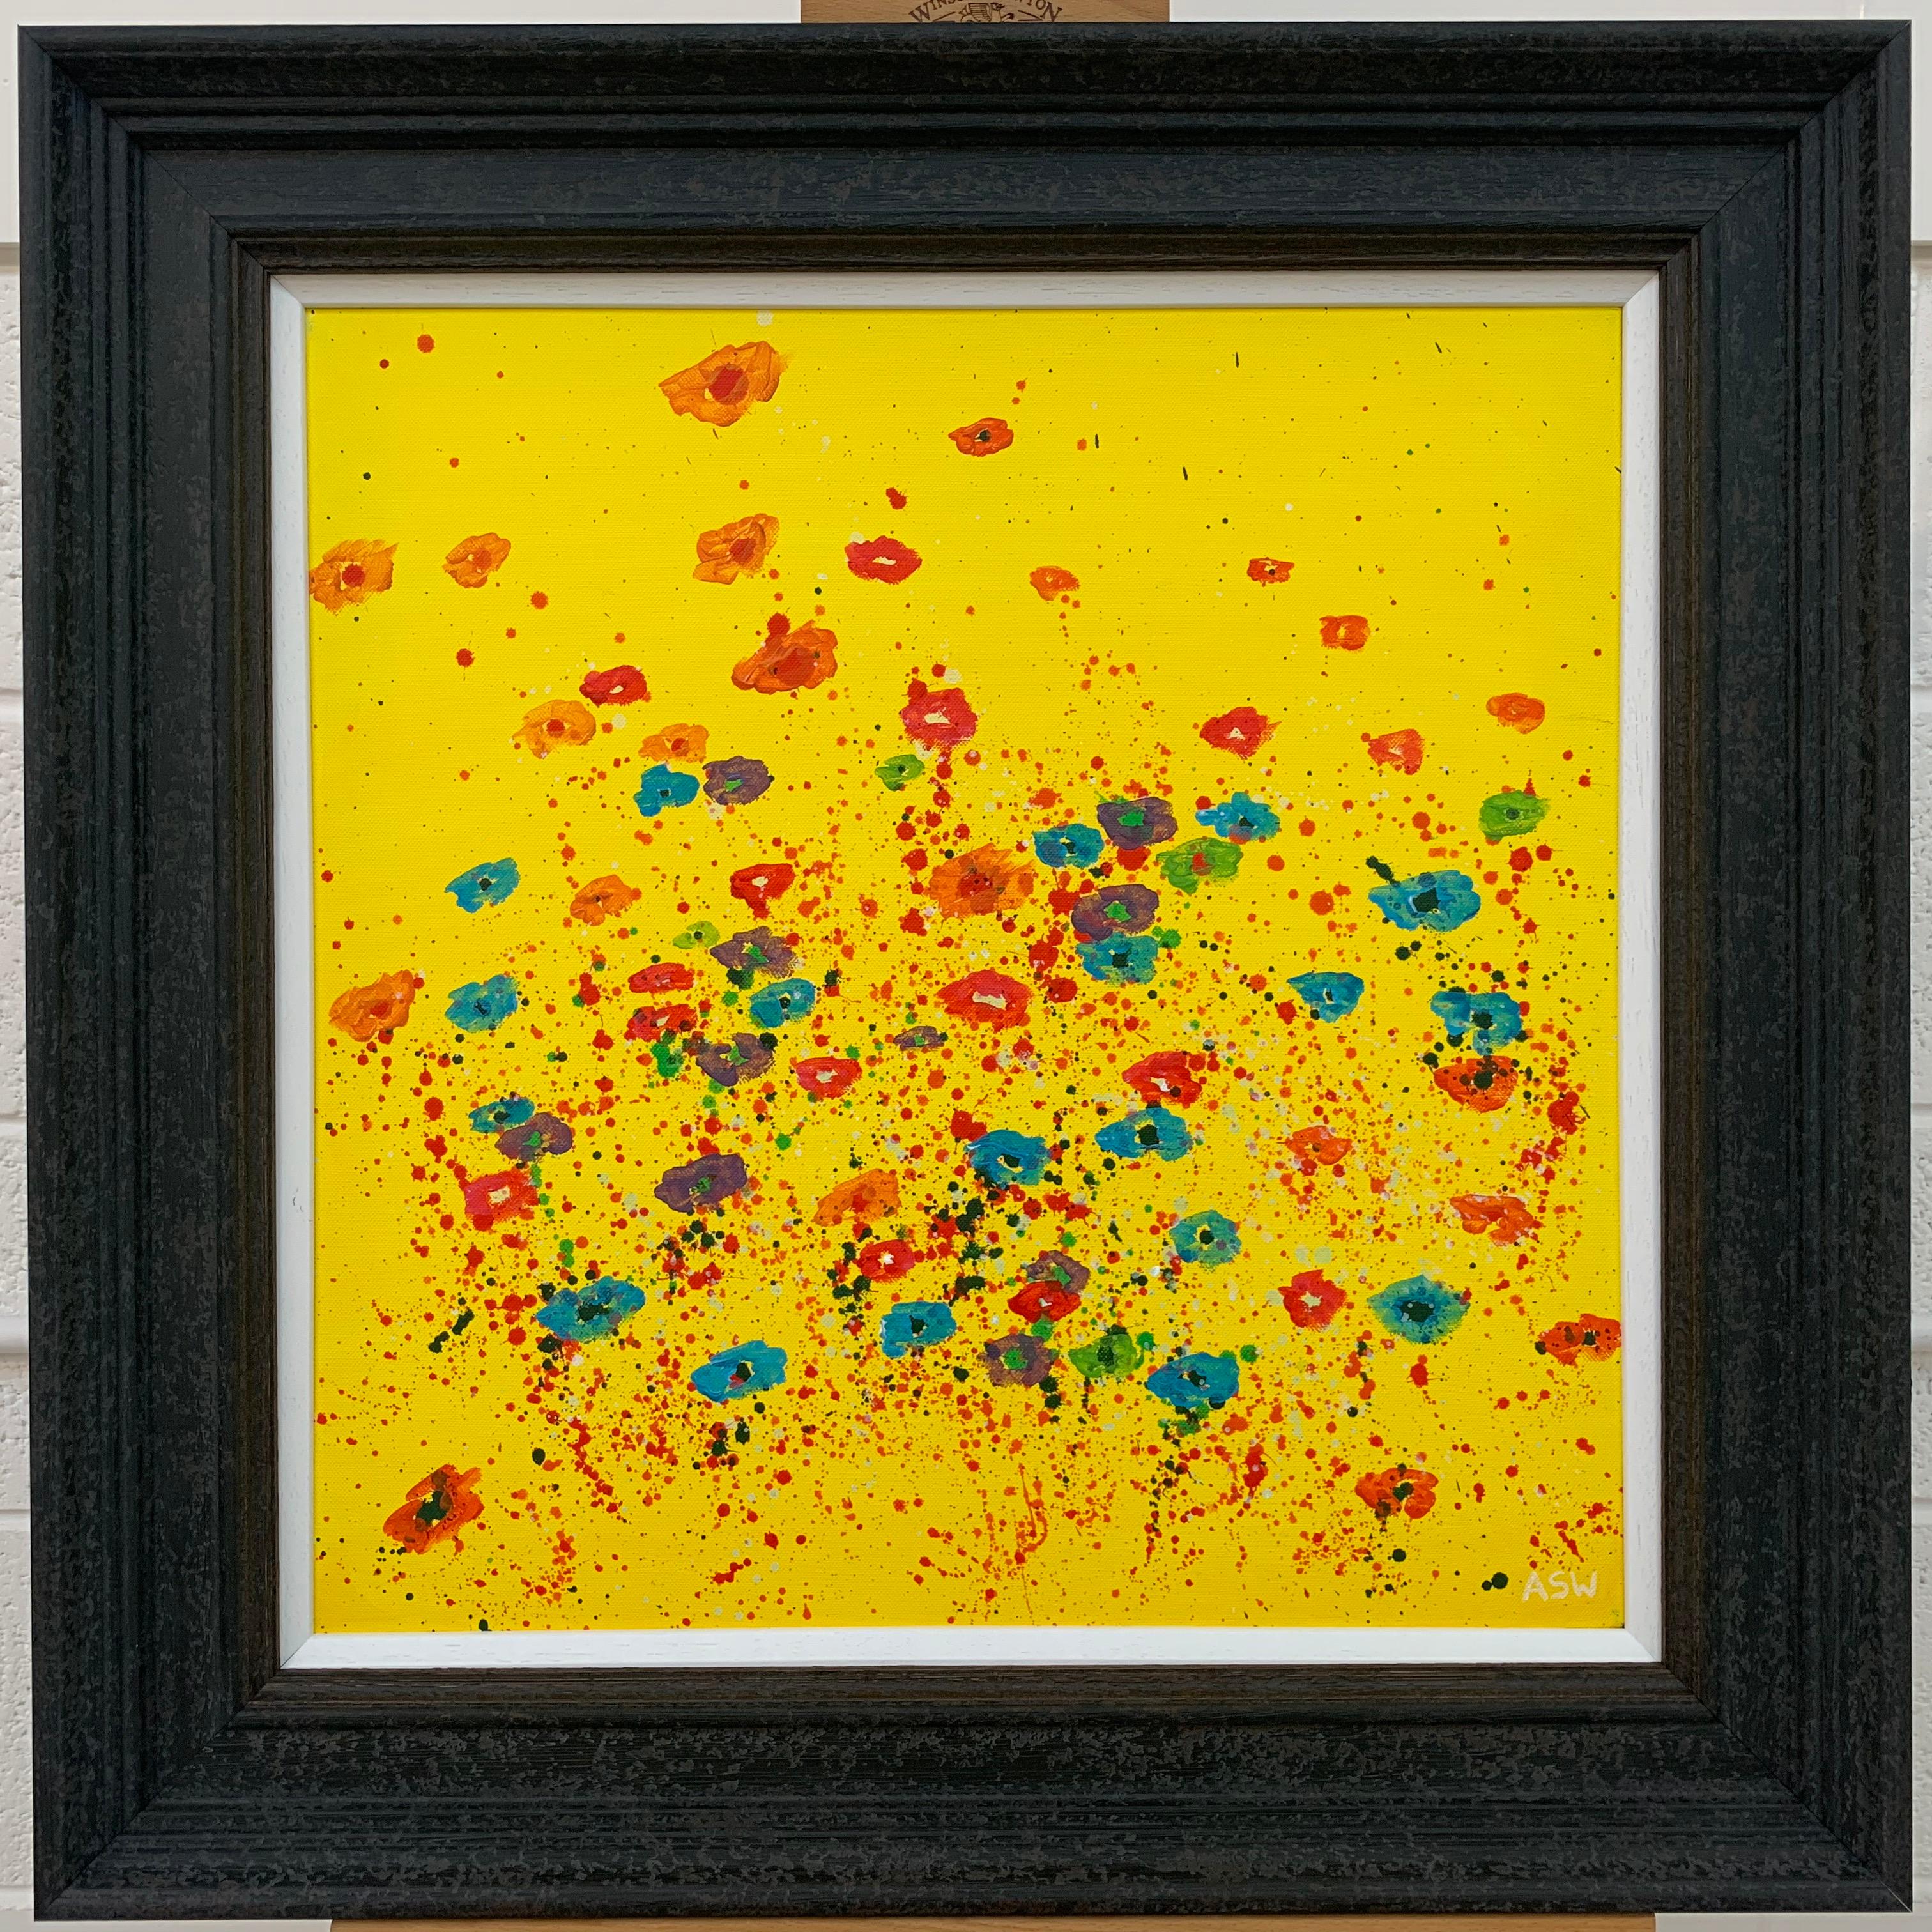 Abstract Red Pink Blue Flowers on Yellow Background by British Landscape Artist For Sale 5